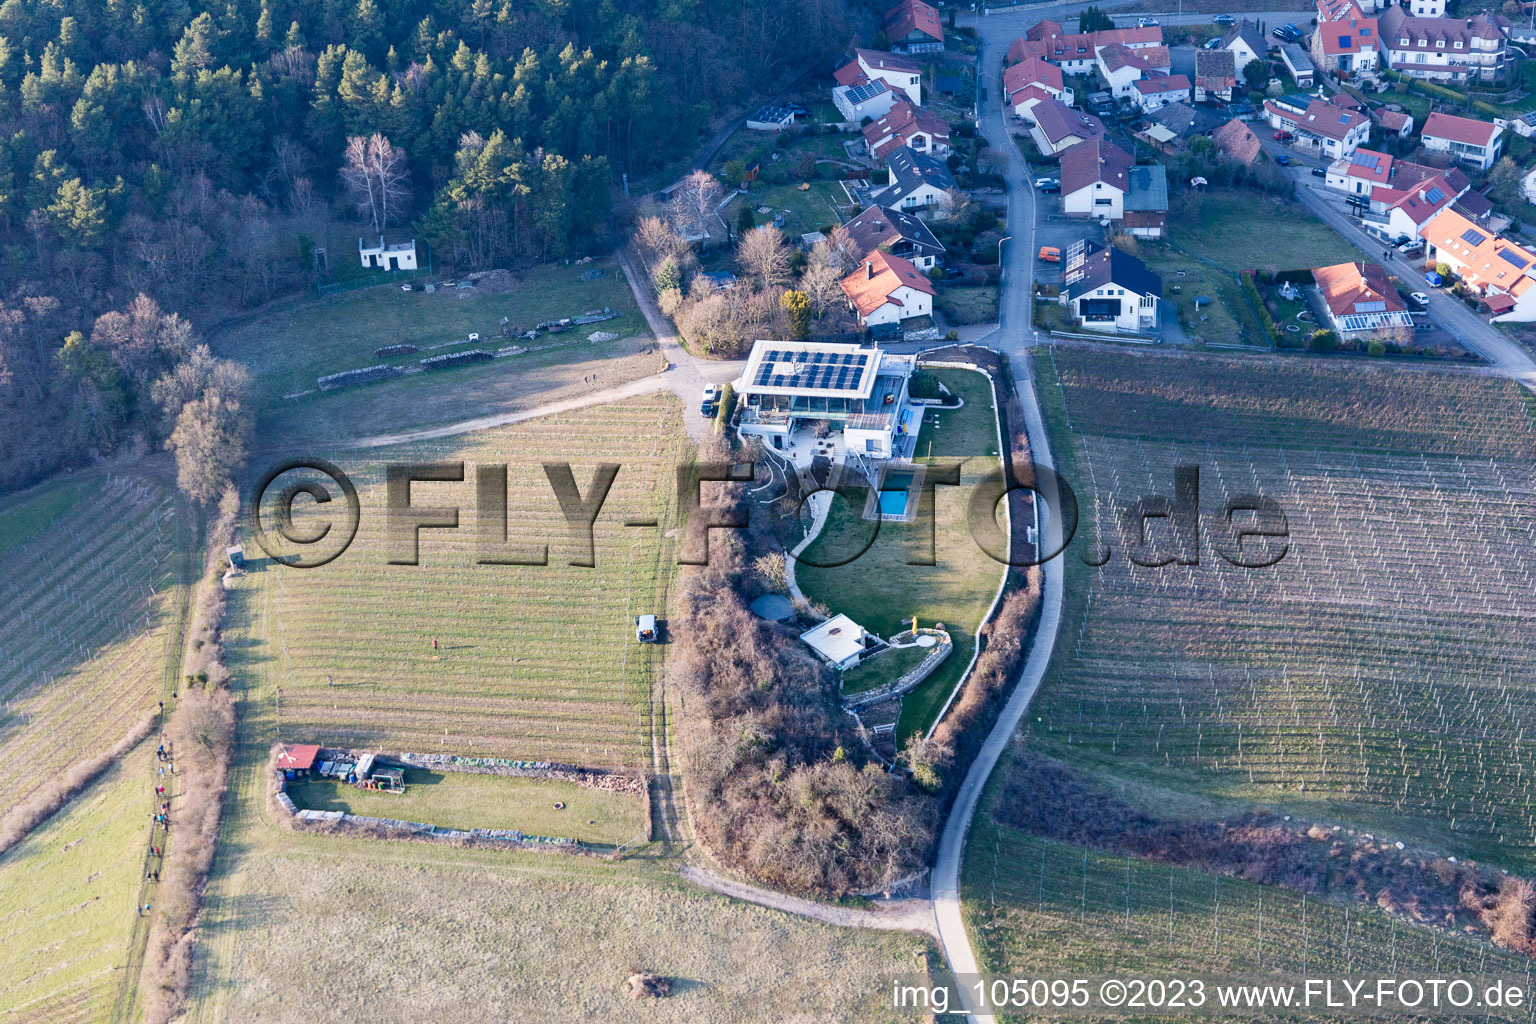 District Gleiszellen in Gleiszellen-Gleishorbach in the state Rhineland-Palatinate, Germany from a drone